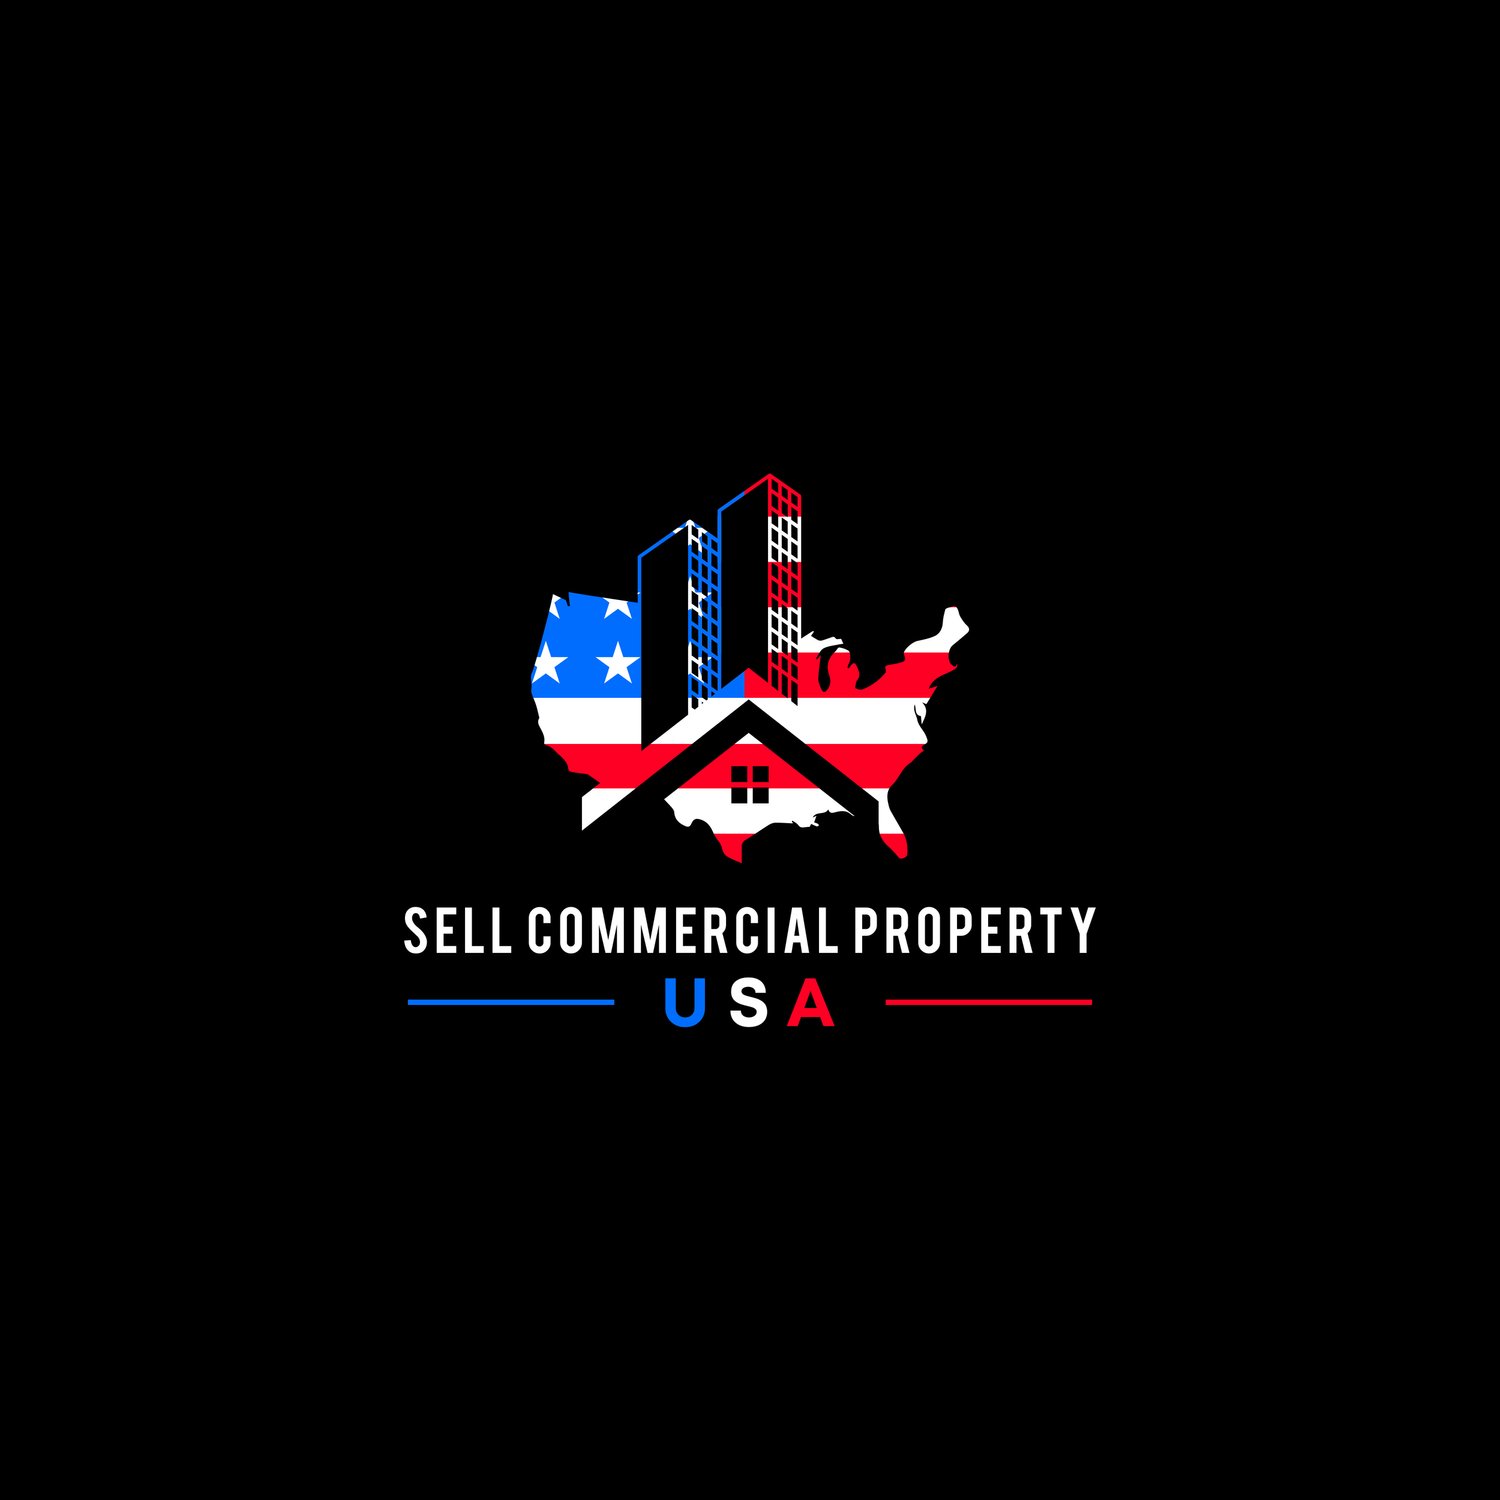 Sell Commercial Property Nationwide USA | 1 (800) 467-4077 | We Buy Commercial Property | Commercial Property for Sale USA | Cash for Commercial Properties | Commercial Property Buyers